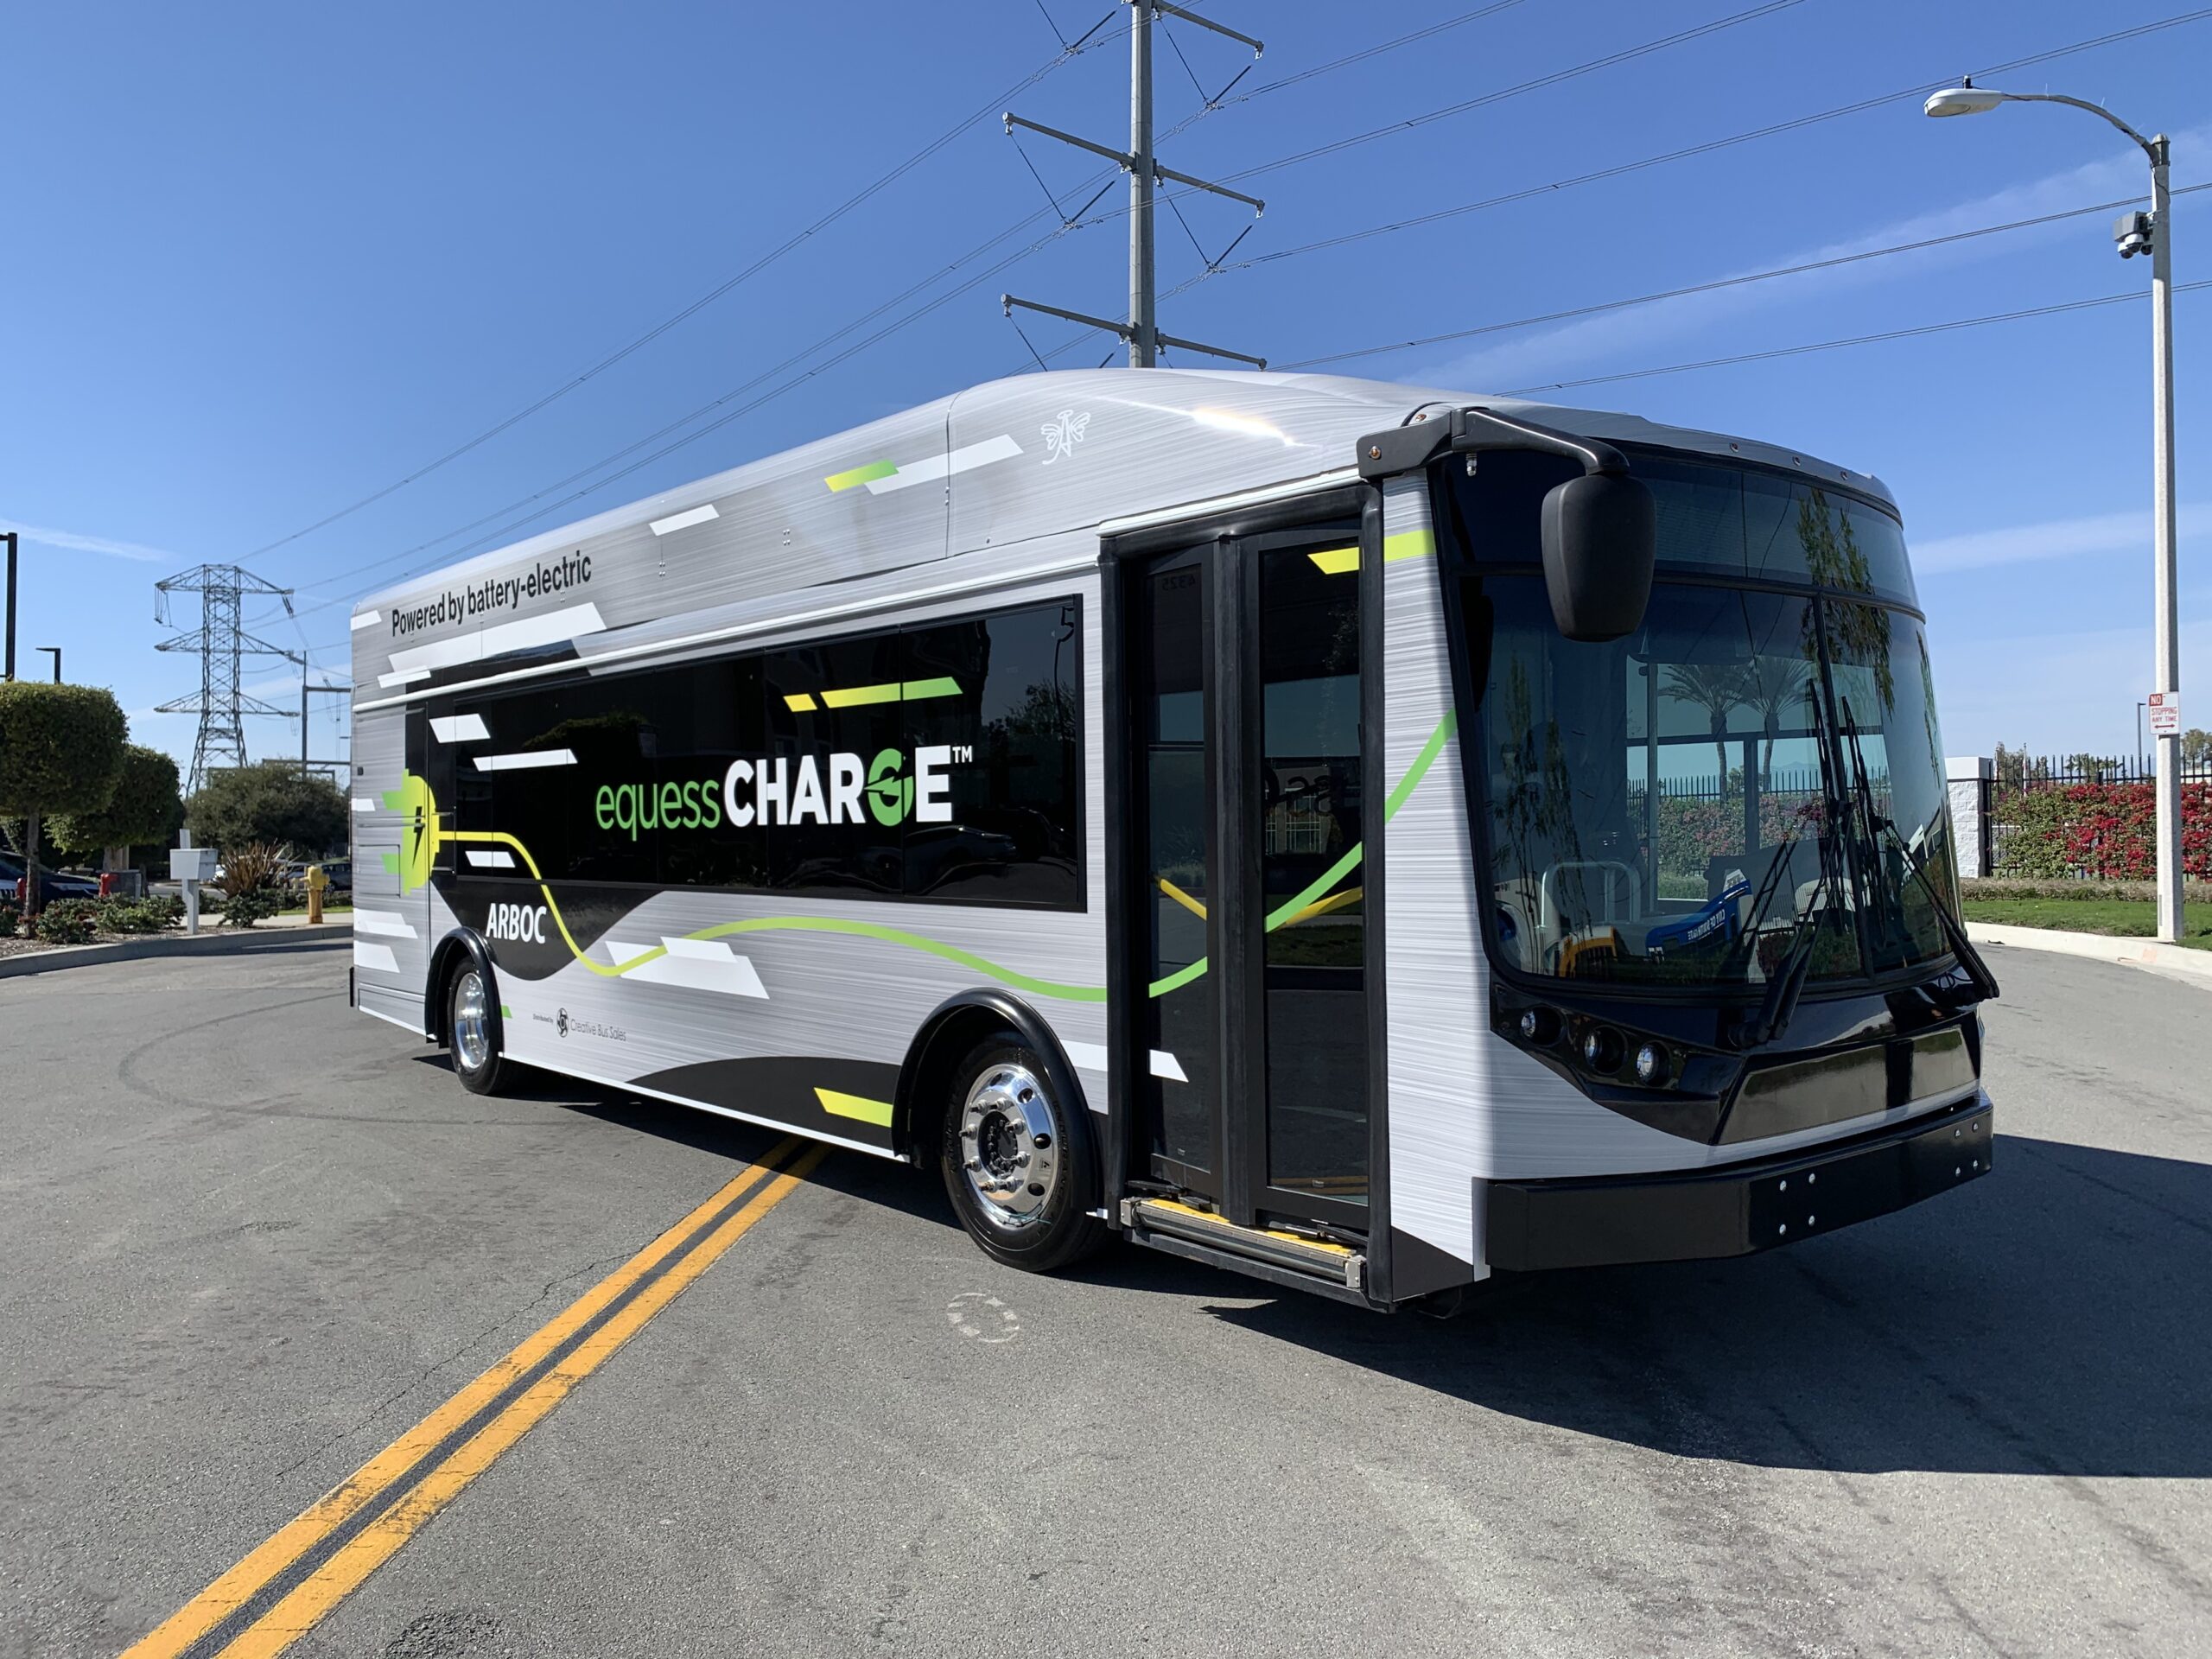 An electric bus, the 2021 ARBOC Equess CHARGE, is driving down a street.